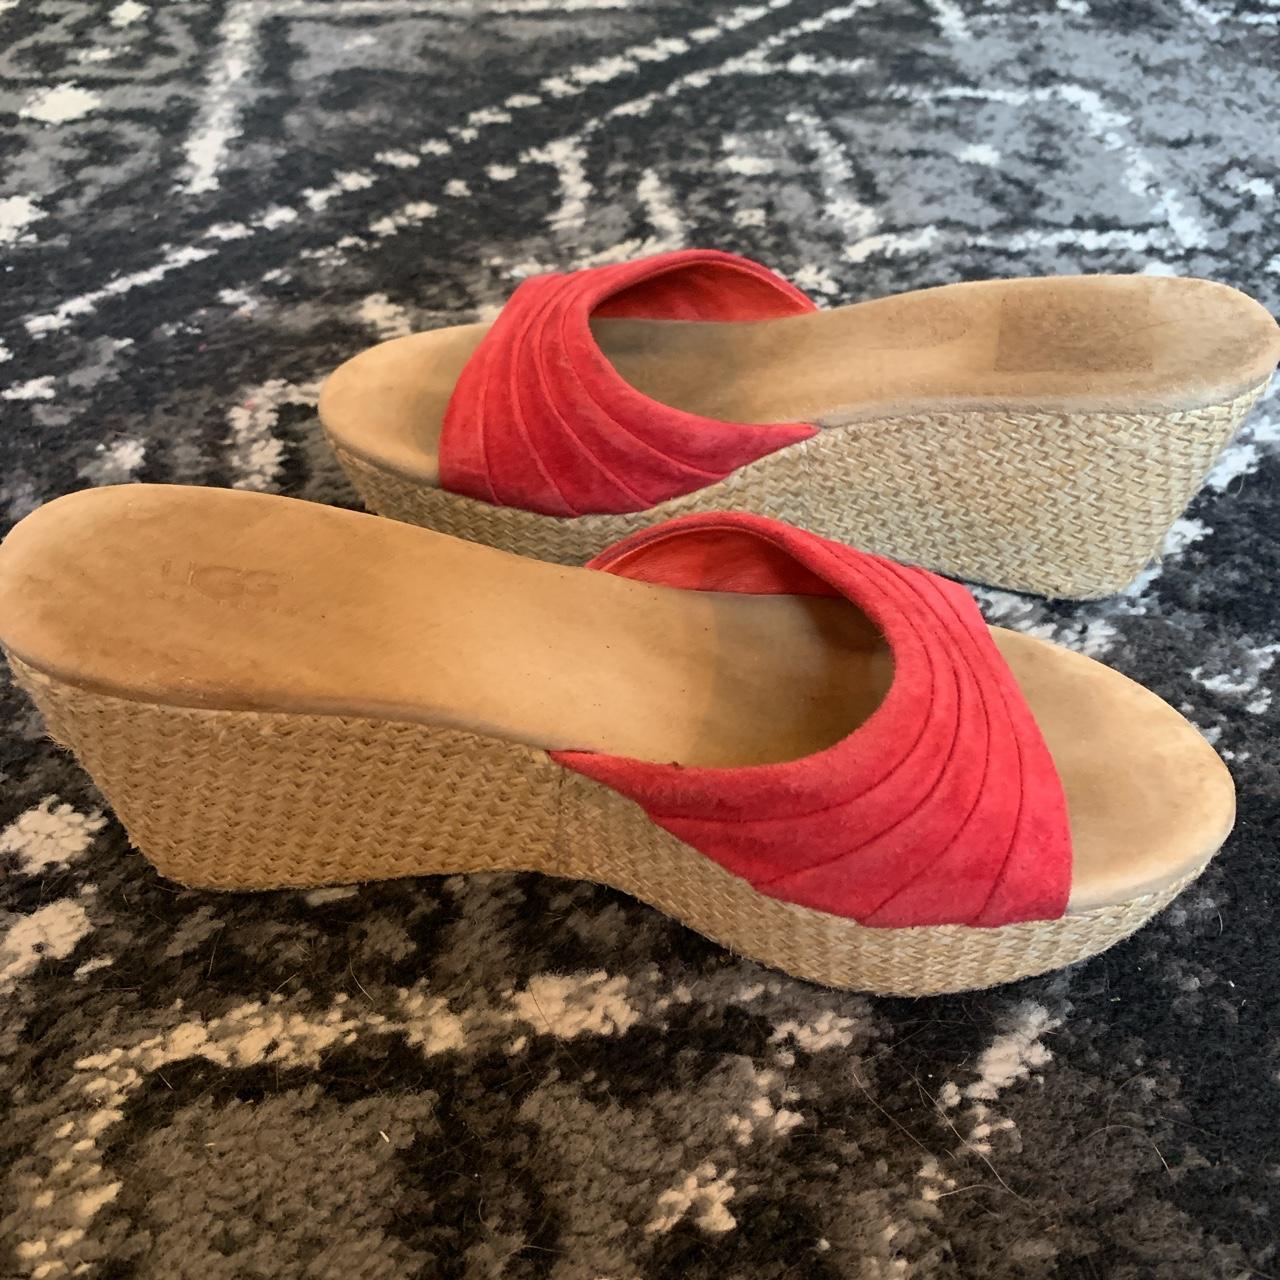 UGG Women's Tan and Red Sandals | Depop